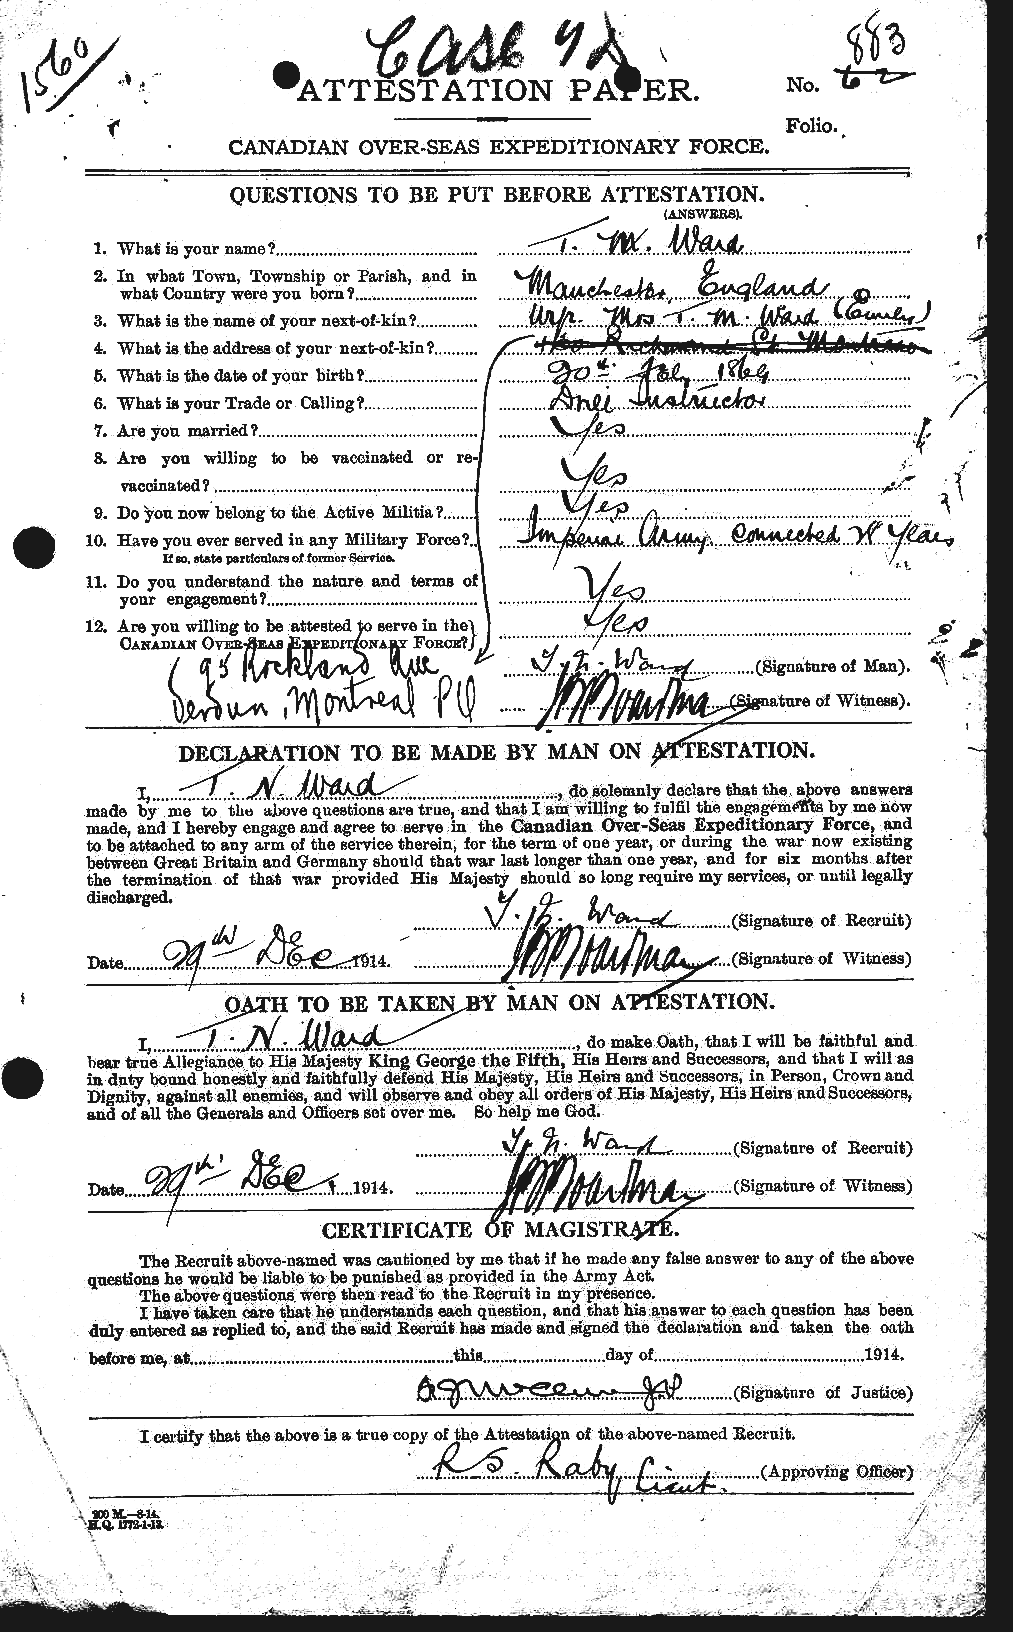 Personnel Records of the First World War - CEF 659706a